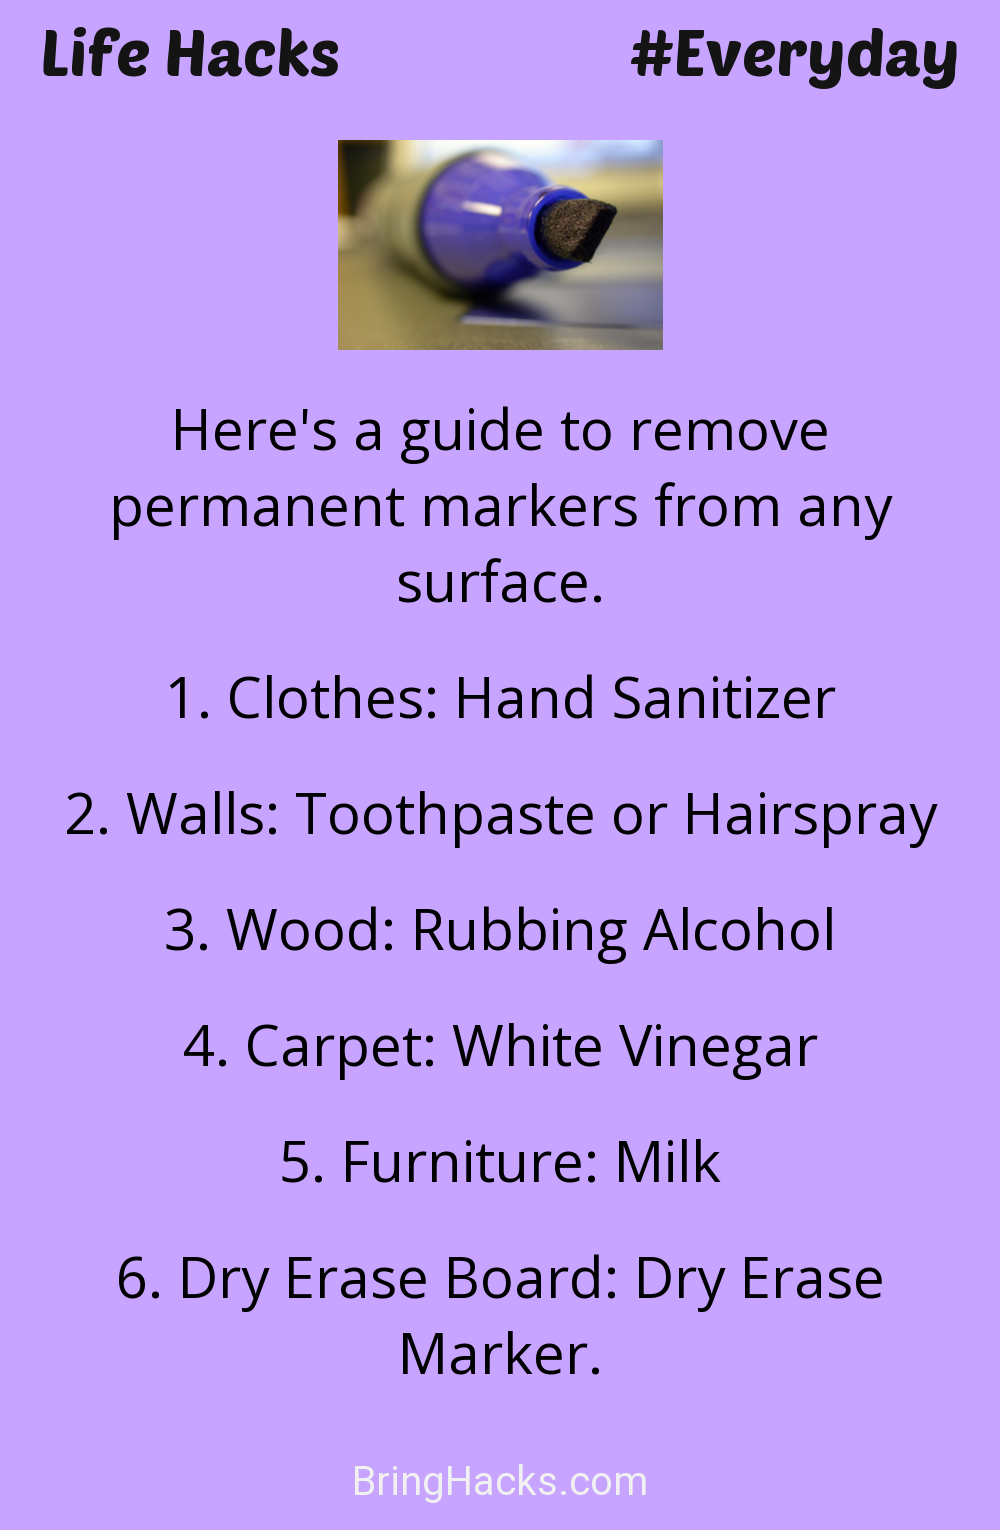 Life Hacks: - Here's a guide to remove permanent markers from any surface.
Clothes: Hand Sanitizer Walls: Toothpaste or Hairspray Wood: Rubbing Alcohol Carpet: White Vinegar Furniture: Milk Dry Erase Board: Dry Erase Marker.